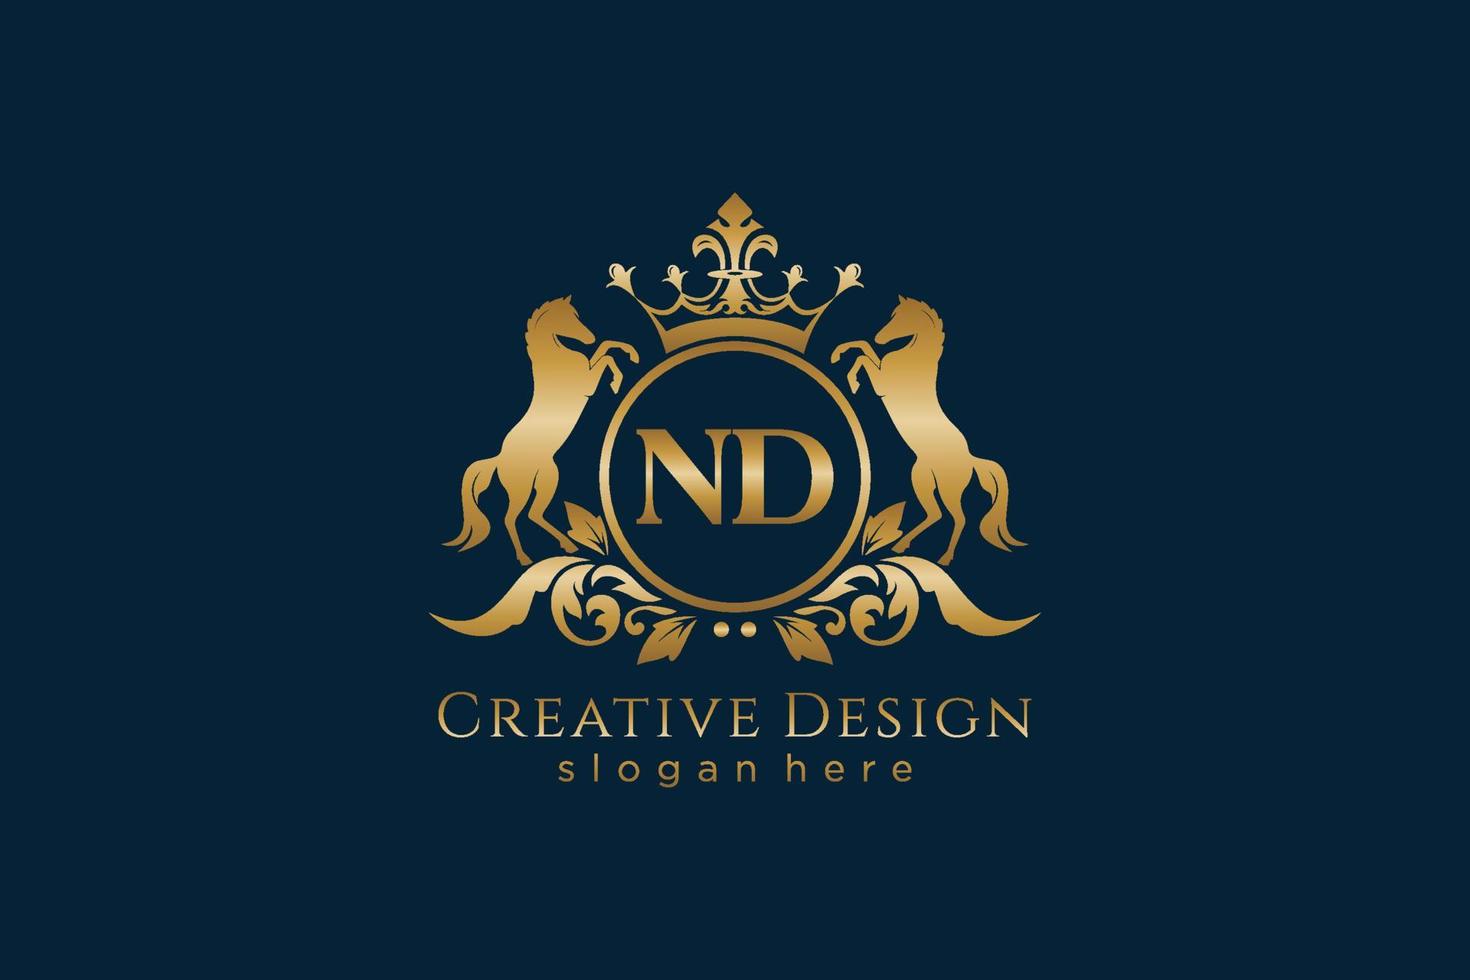 initial ND Retro golden crest with circle and two horses, badge template with scrolls and royal crown - perfect for luxurious branding projects vector